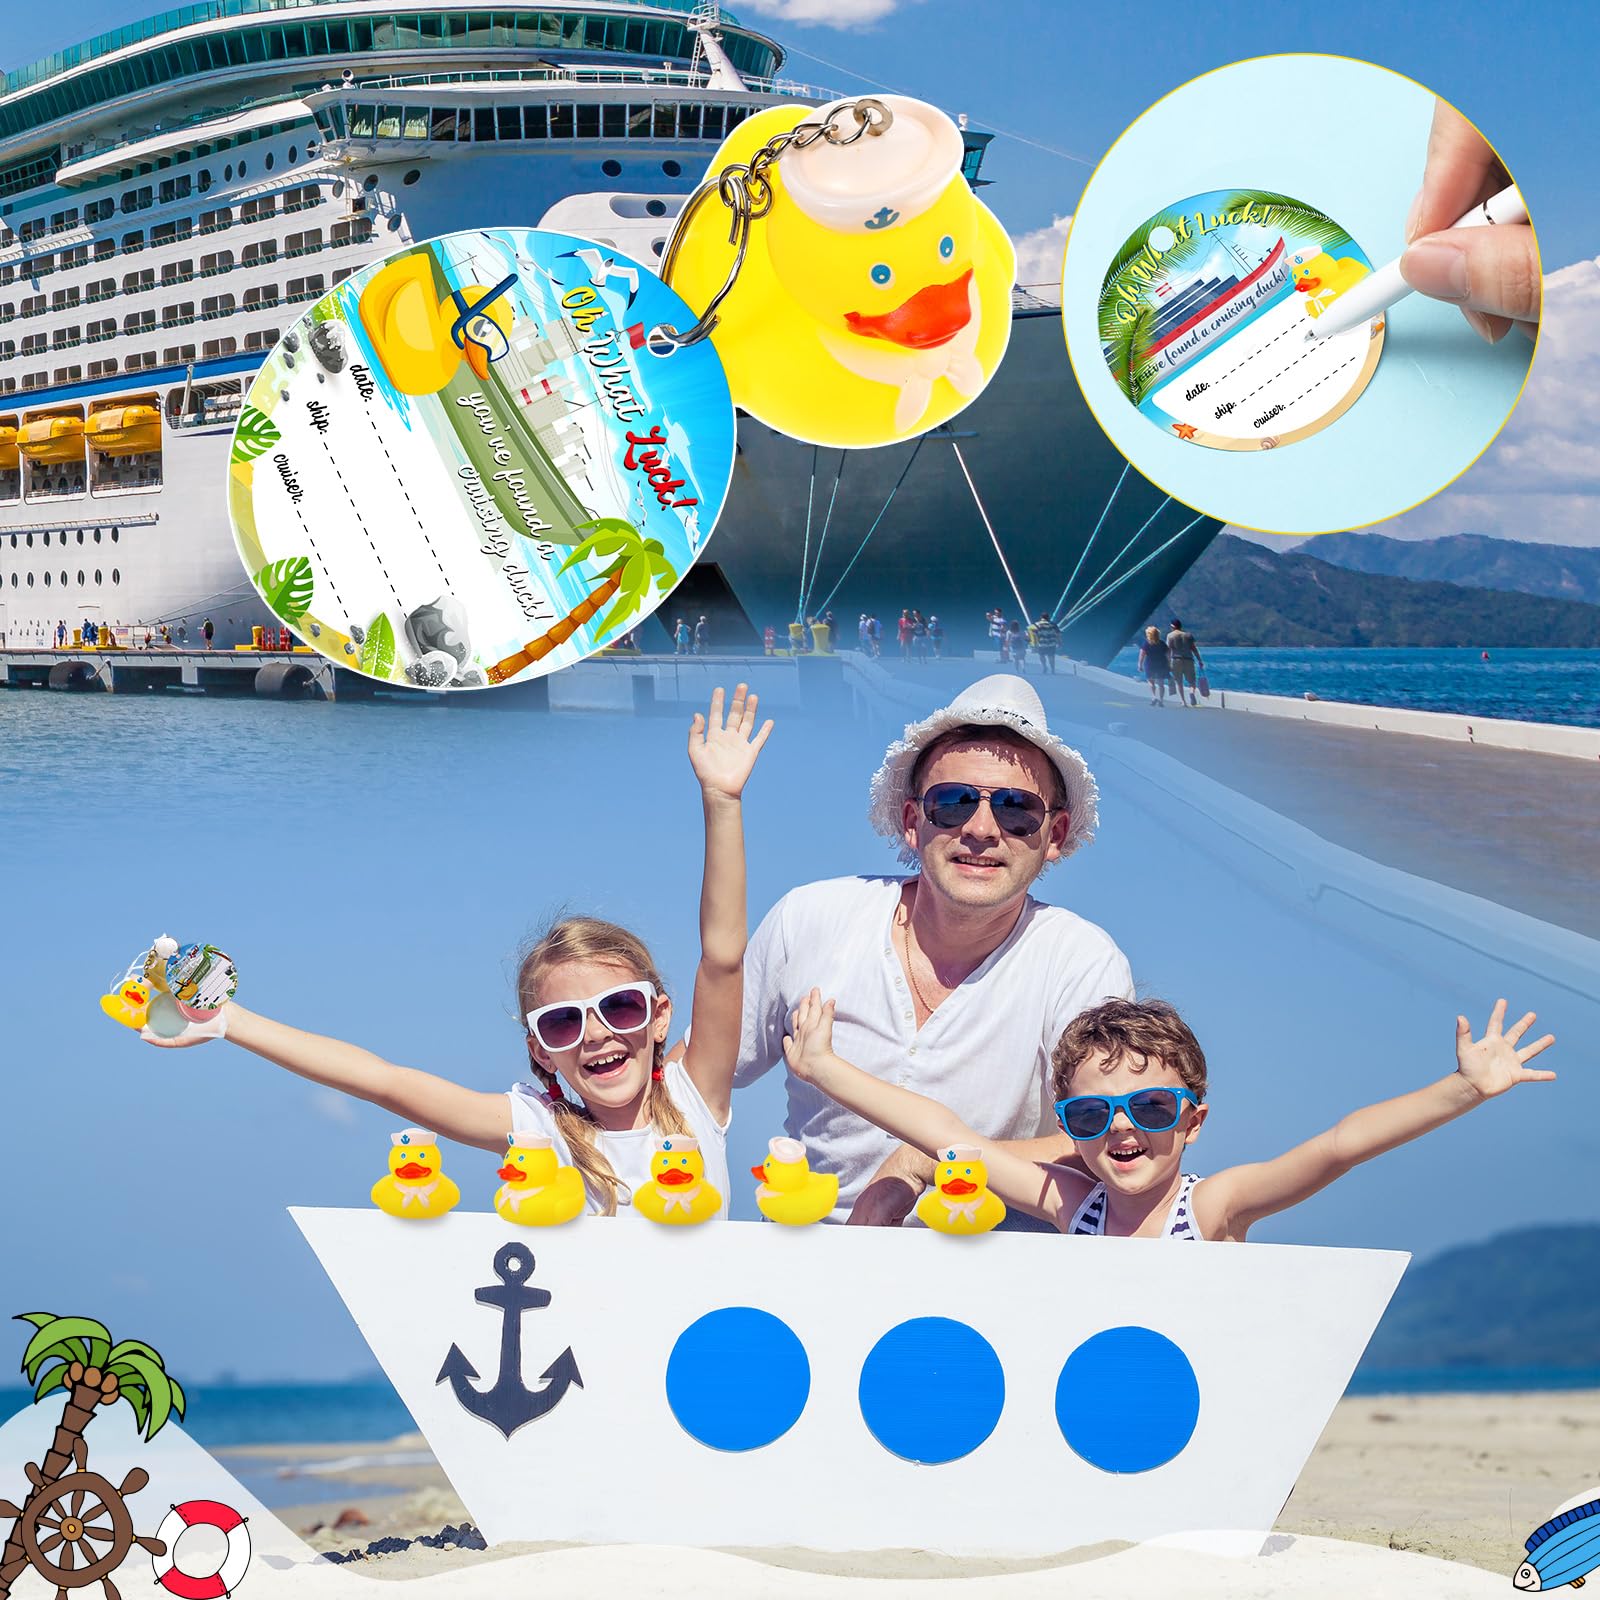 Kigeli 72 Pcs Duck Tag Cruise Kits Includes 24 Cruising Rubber Duck Keychains 24 Duck Tags 24 Organza Bags for Ducking Game Cruise Ships Hiding Carnival Sailing Party Favor Supplies